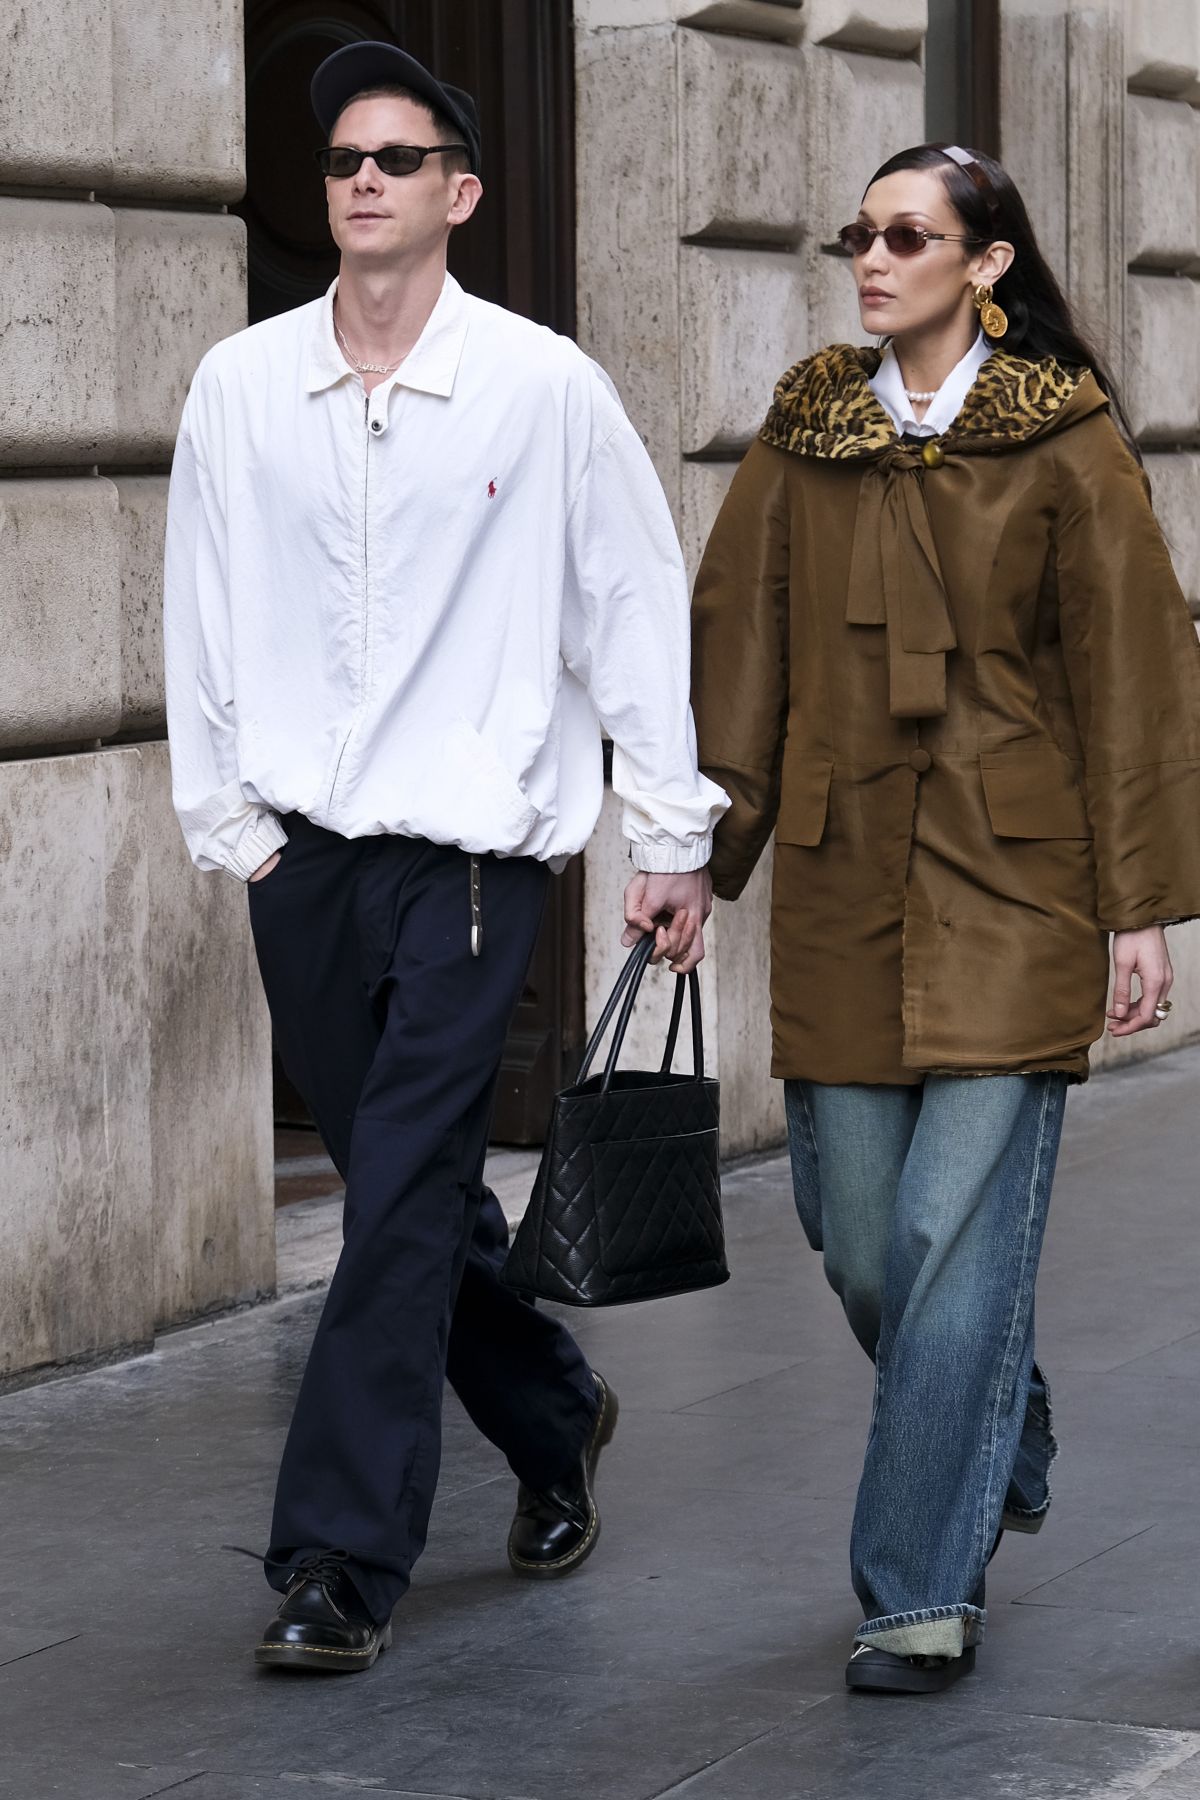 BELLA HADID and Marc Kalman Out Shopping in Rome 04/01/2022 – HawtCelebs